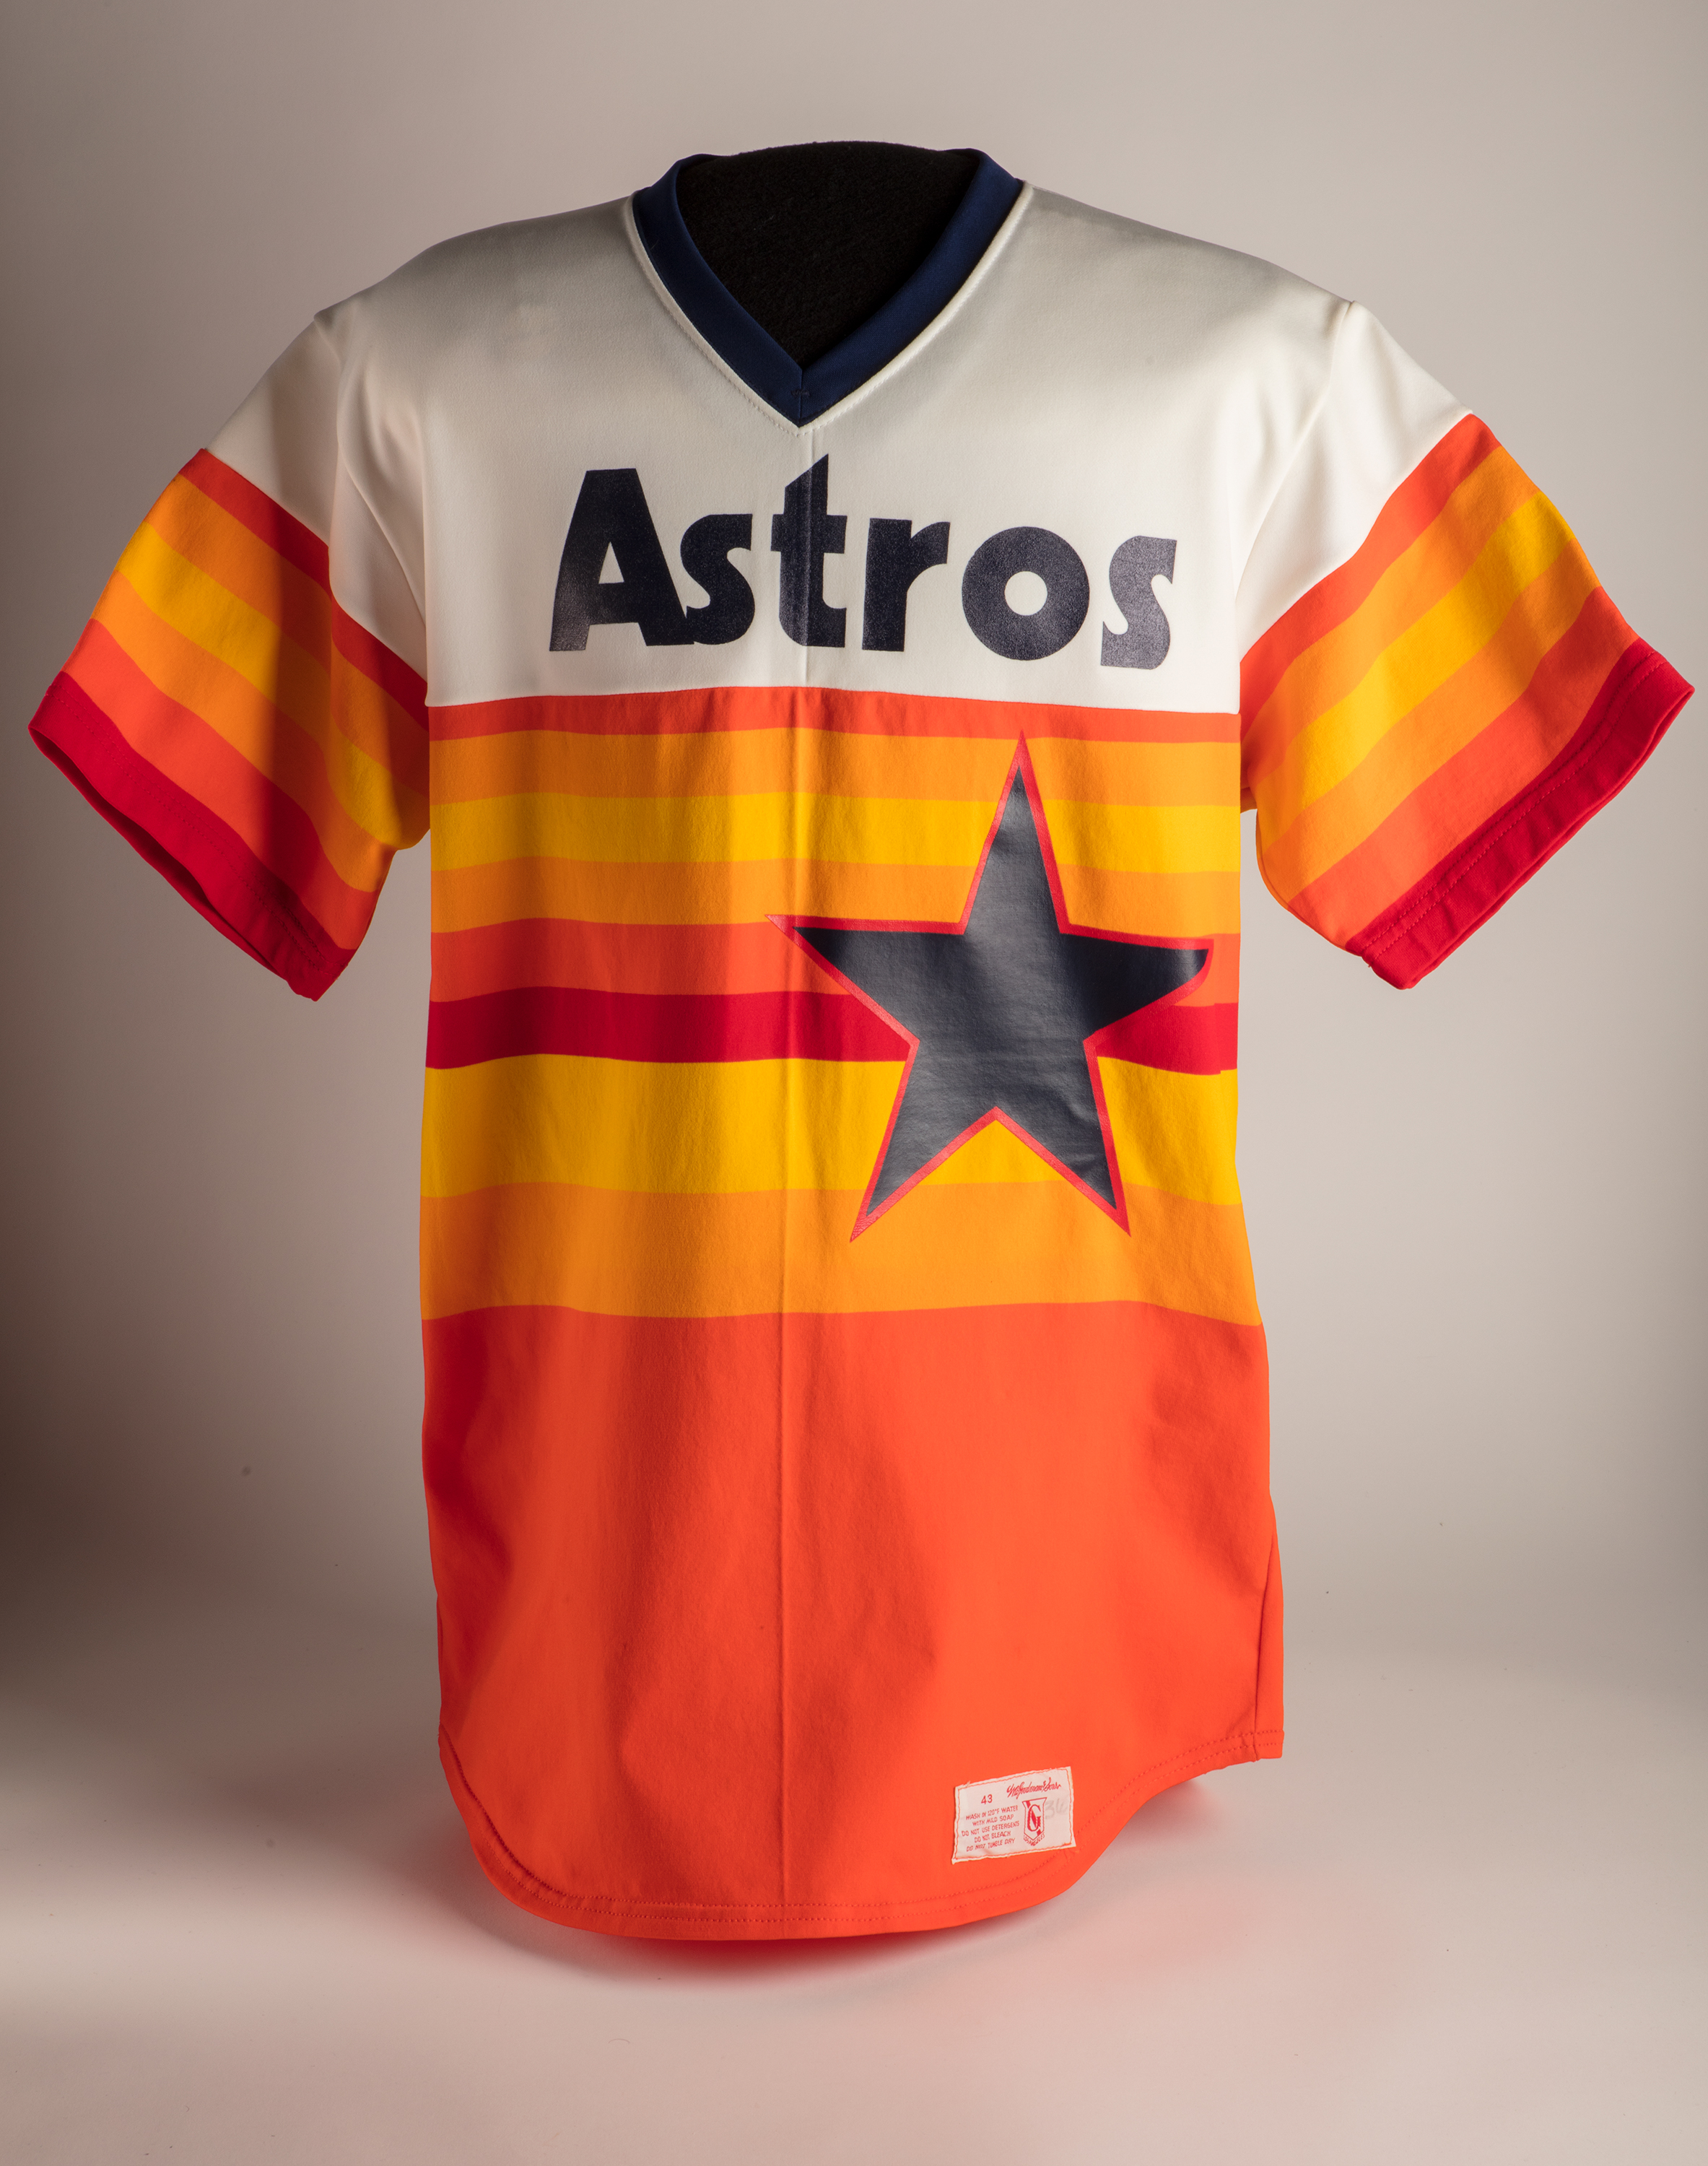 Behind the jerseys: How the iconic Astros rainbow jerseys came to